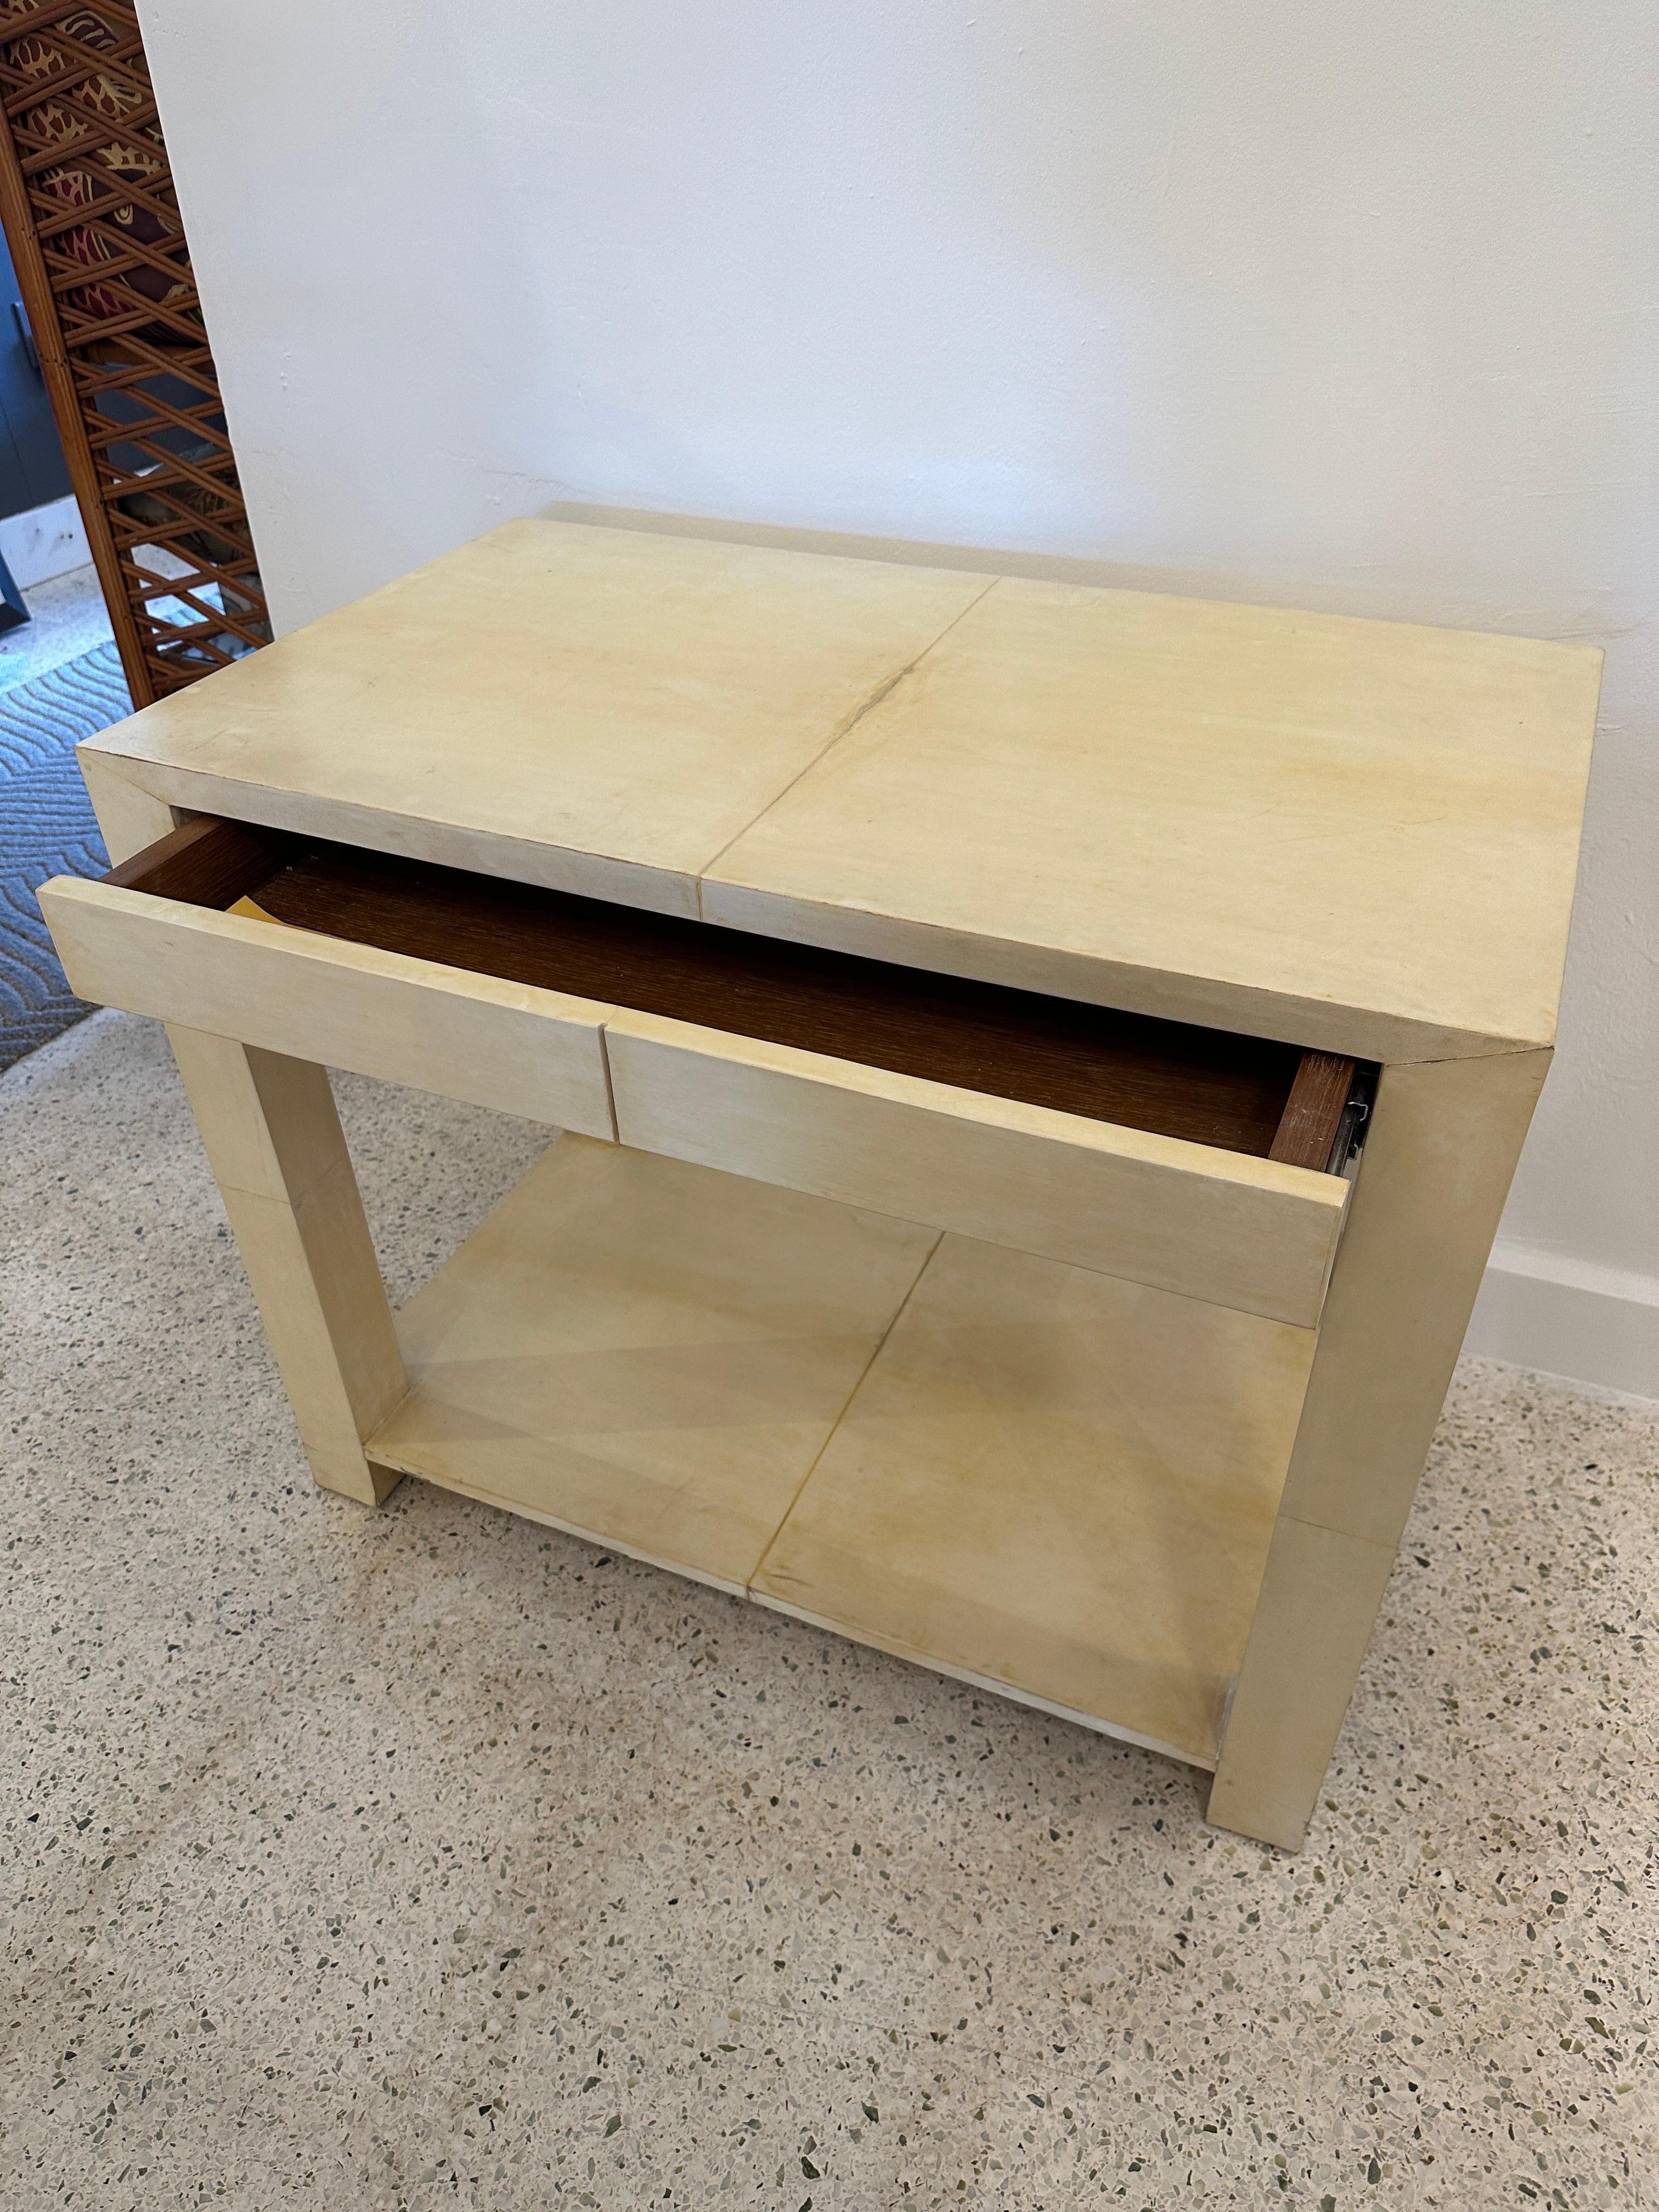 Very simple Parsons style table clad in vellum paper (parchment) with a hidden drawer and two tiers. Can be used as nightstand or foyer piece. Completely covered in vellum parchment with minor discoloration in spots (see detail images) but very